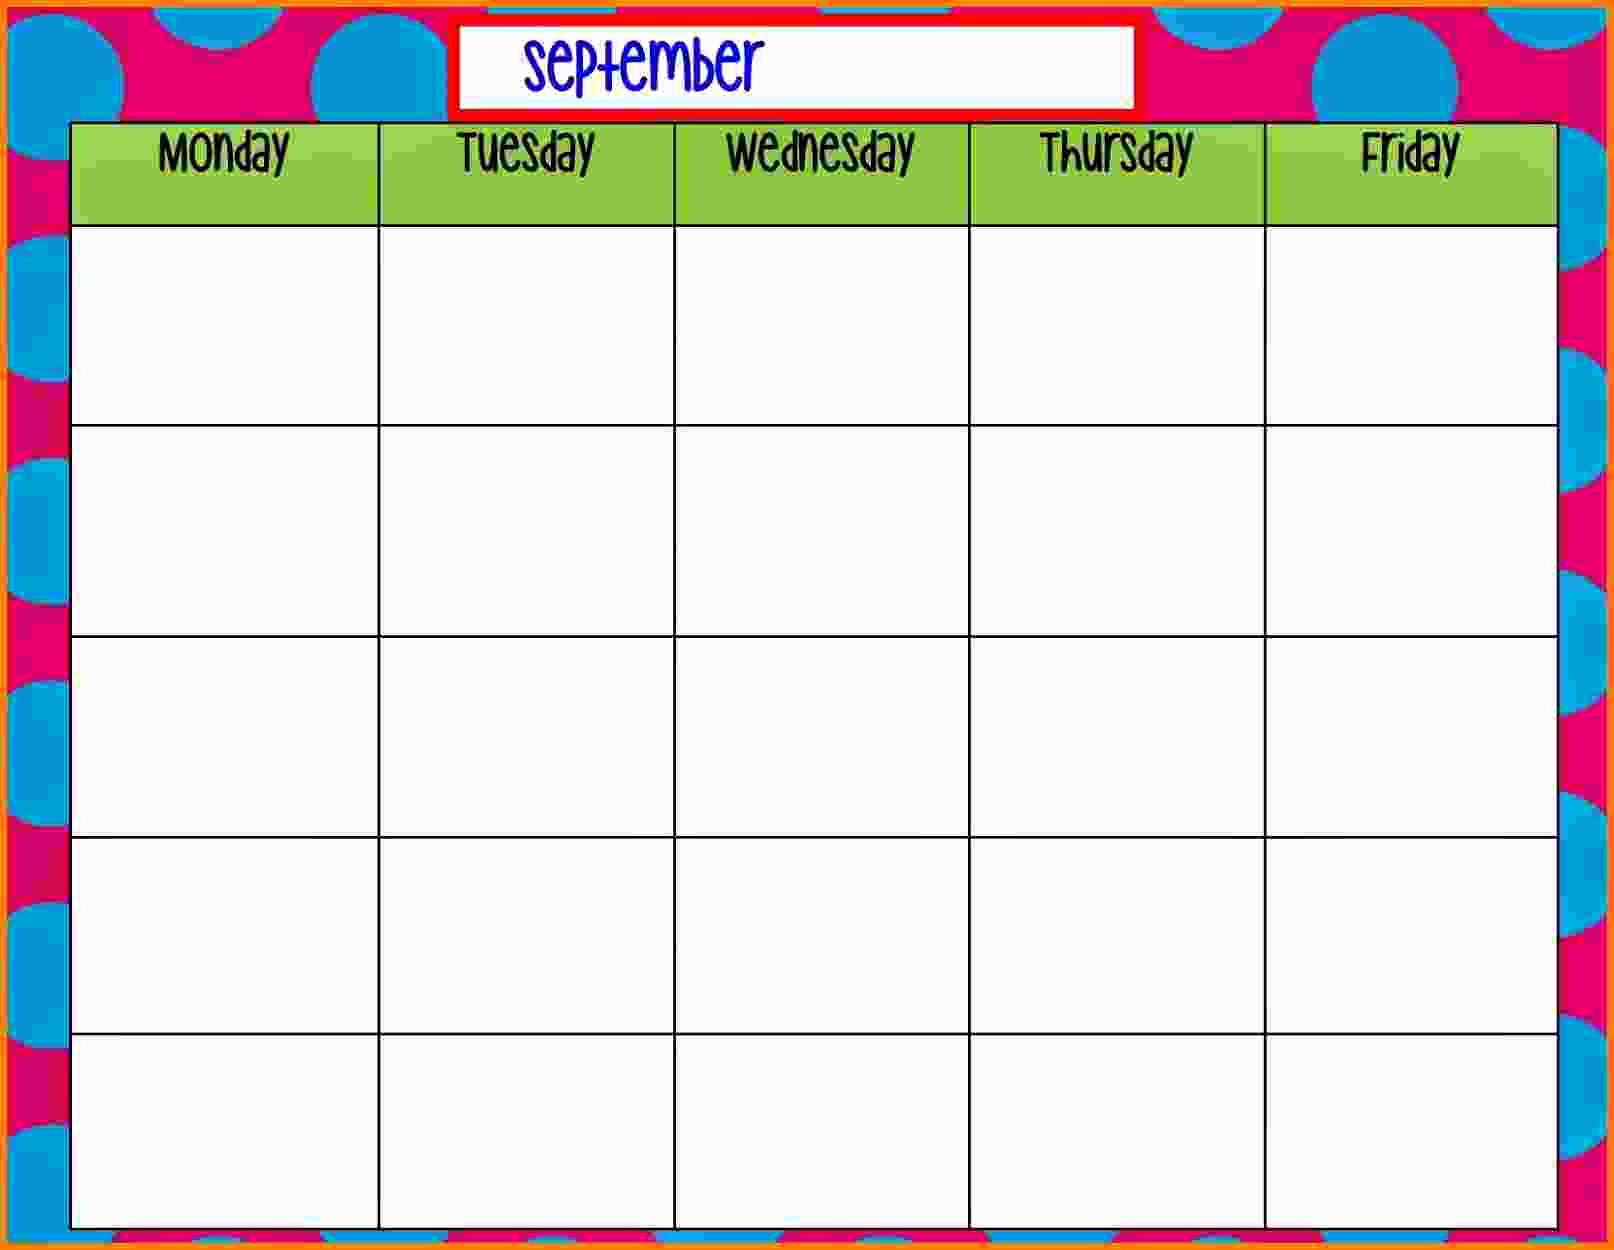 Monday to Friday Schedule Template Unique 10 Monday Thru Friday